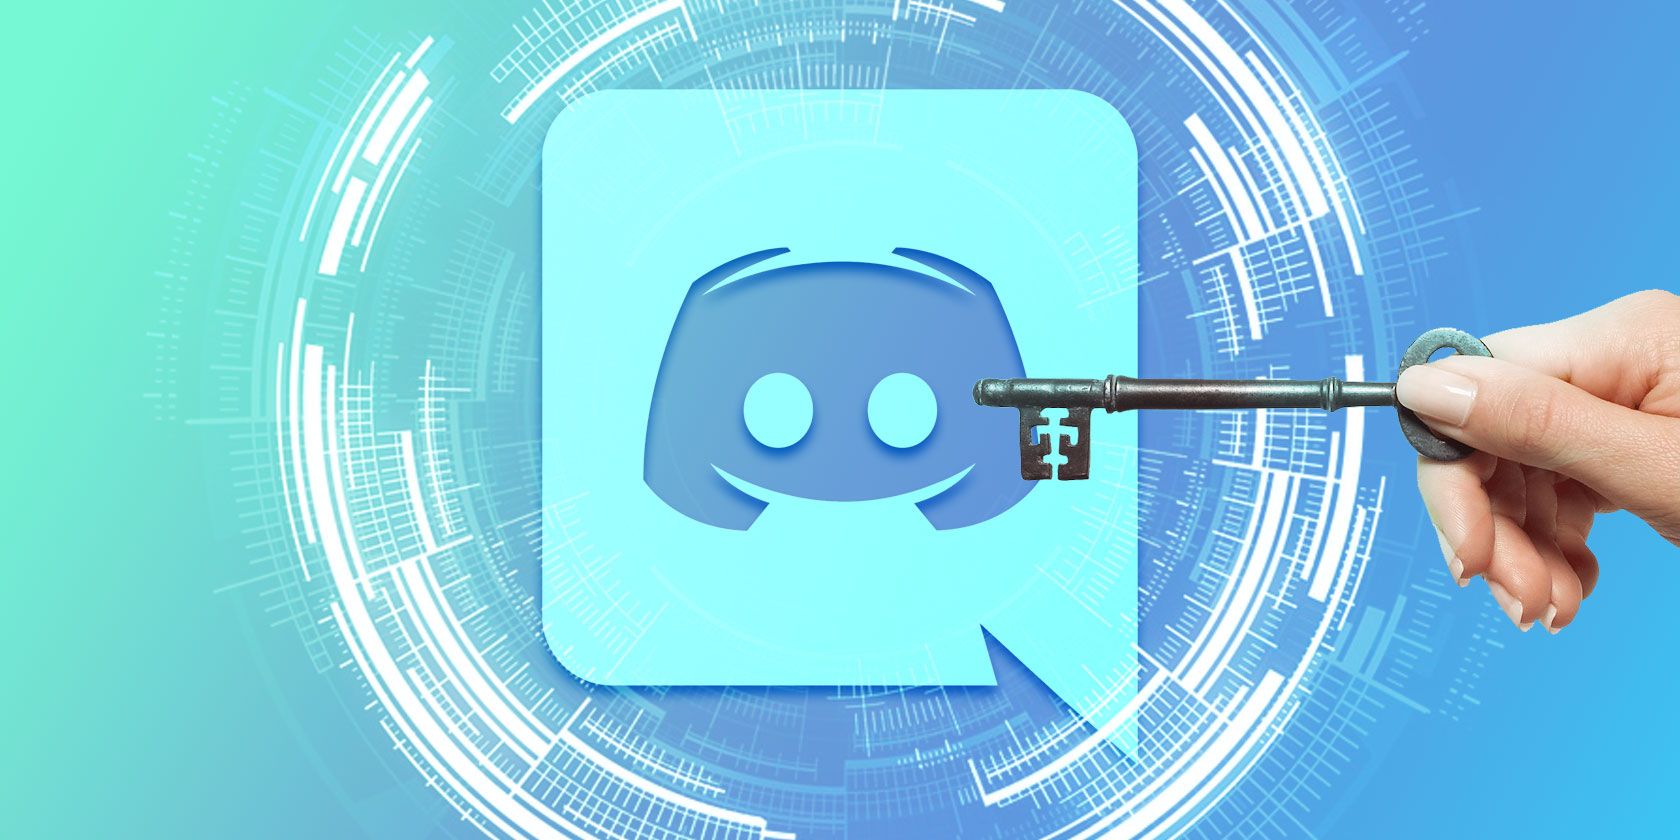 what is the real discord nitro gift link